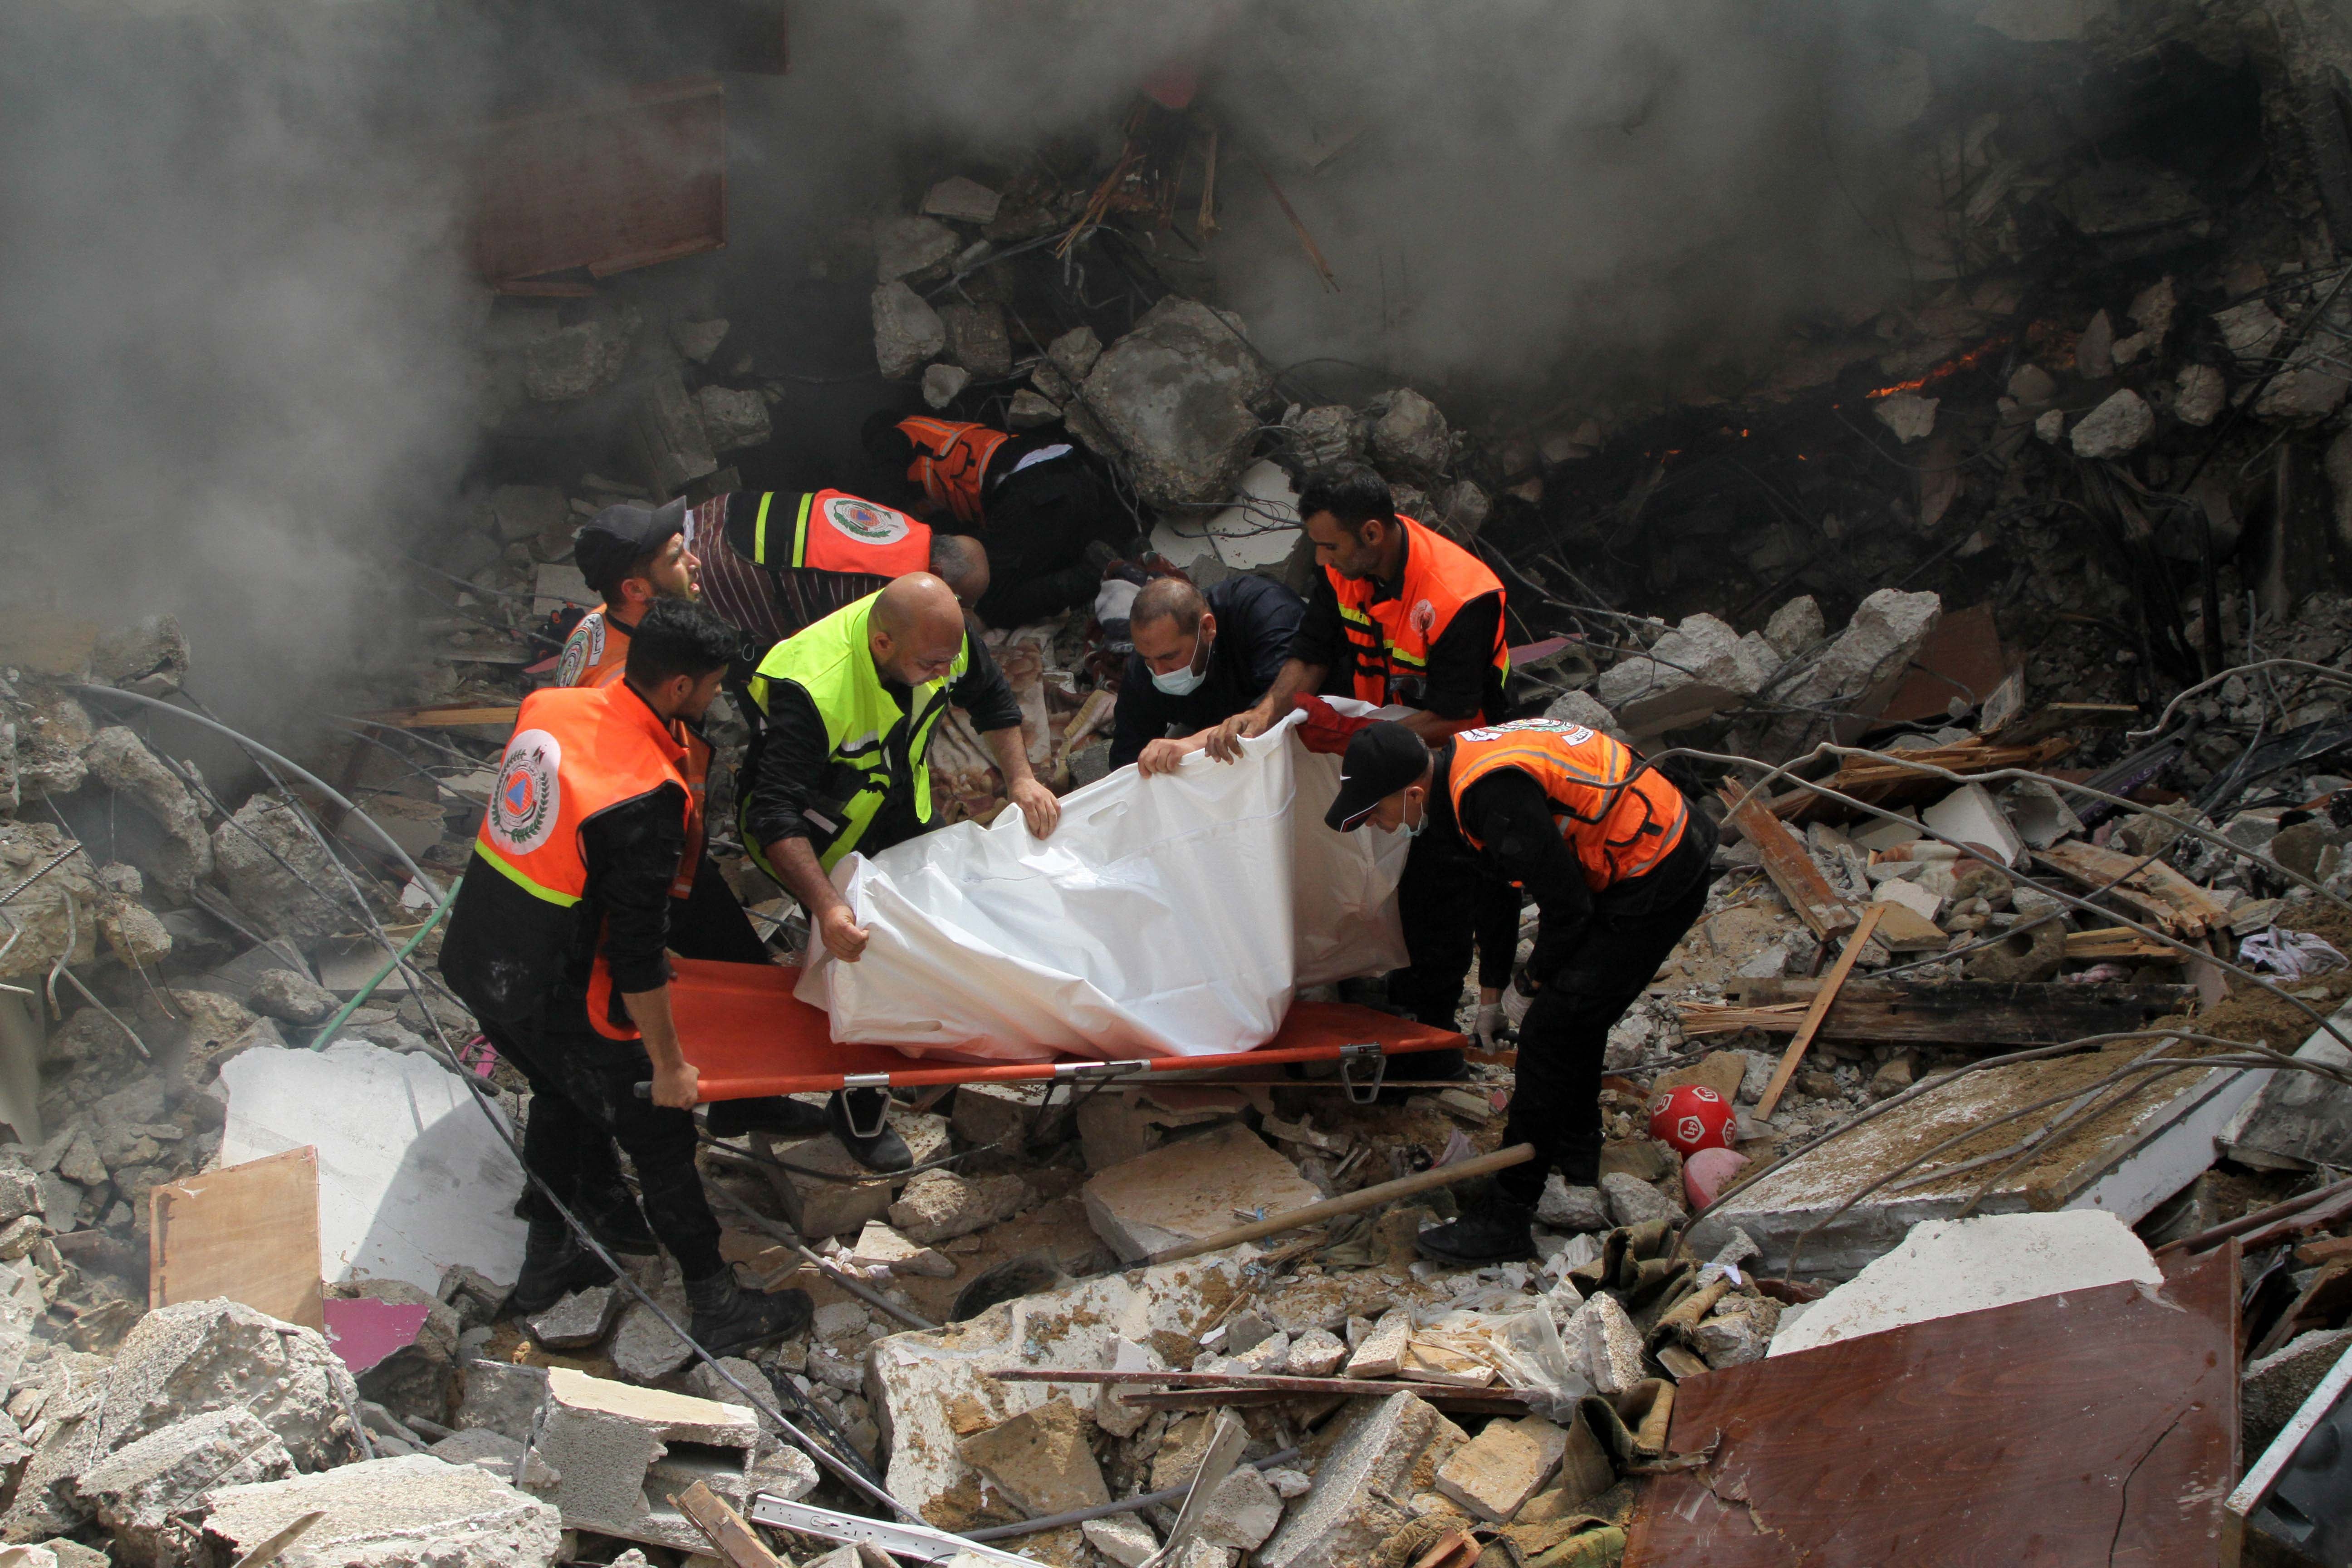 Members of the Palestinian civil defense remove the body of one of the 44 civilians killed after three multi-story residential buildings collapsed as a result of Israeli airstrikes in central Gaza City on May 16. Photo: Rizek Abdeljawad/HRW via Getty Images 